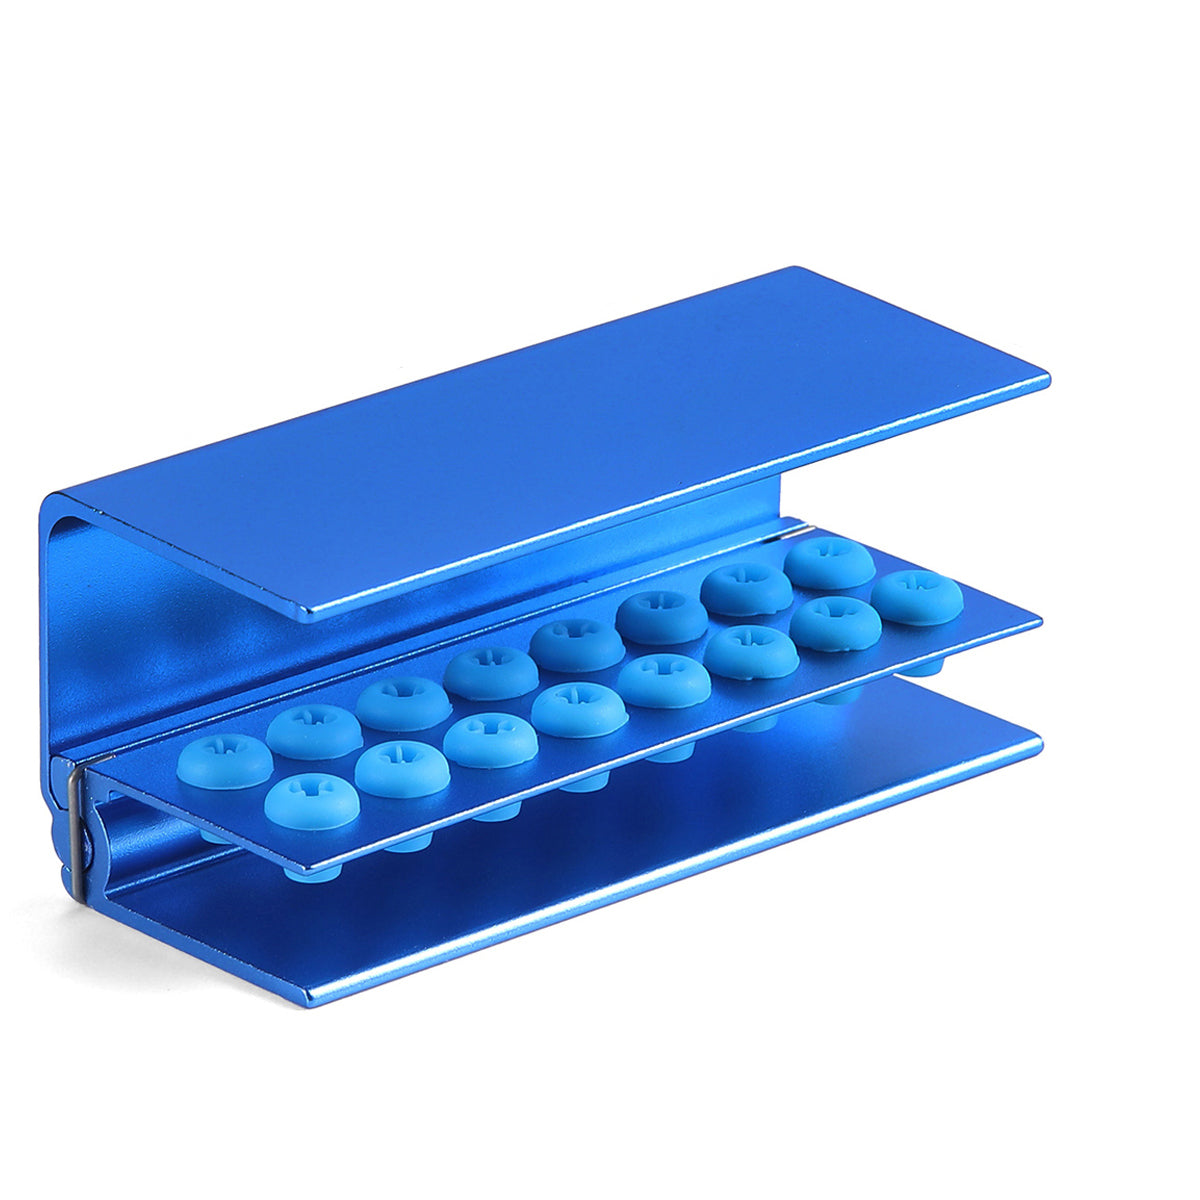 Dental Burs Holder Block Autoclavable with Silicon Cover 10 Holes Blue - pairaydental.com